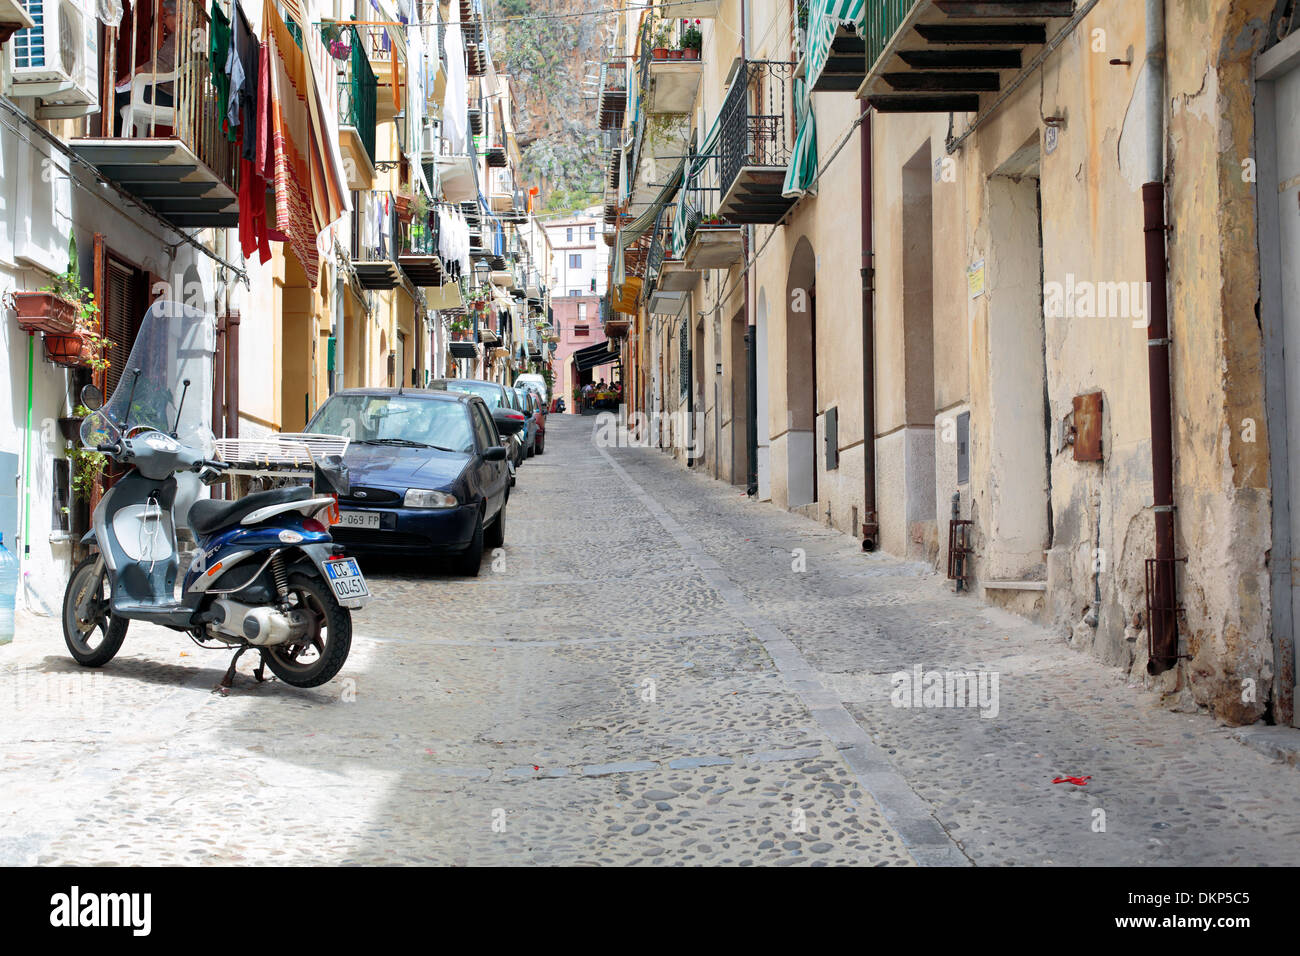 Street in old town, Cefalu, Sicily, Italy Stock Photo